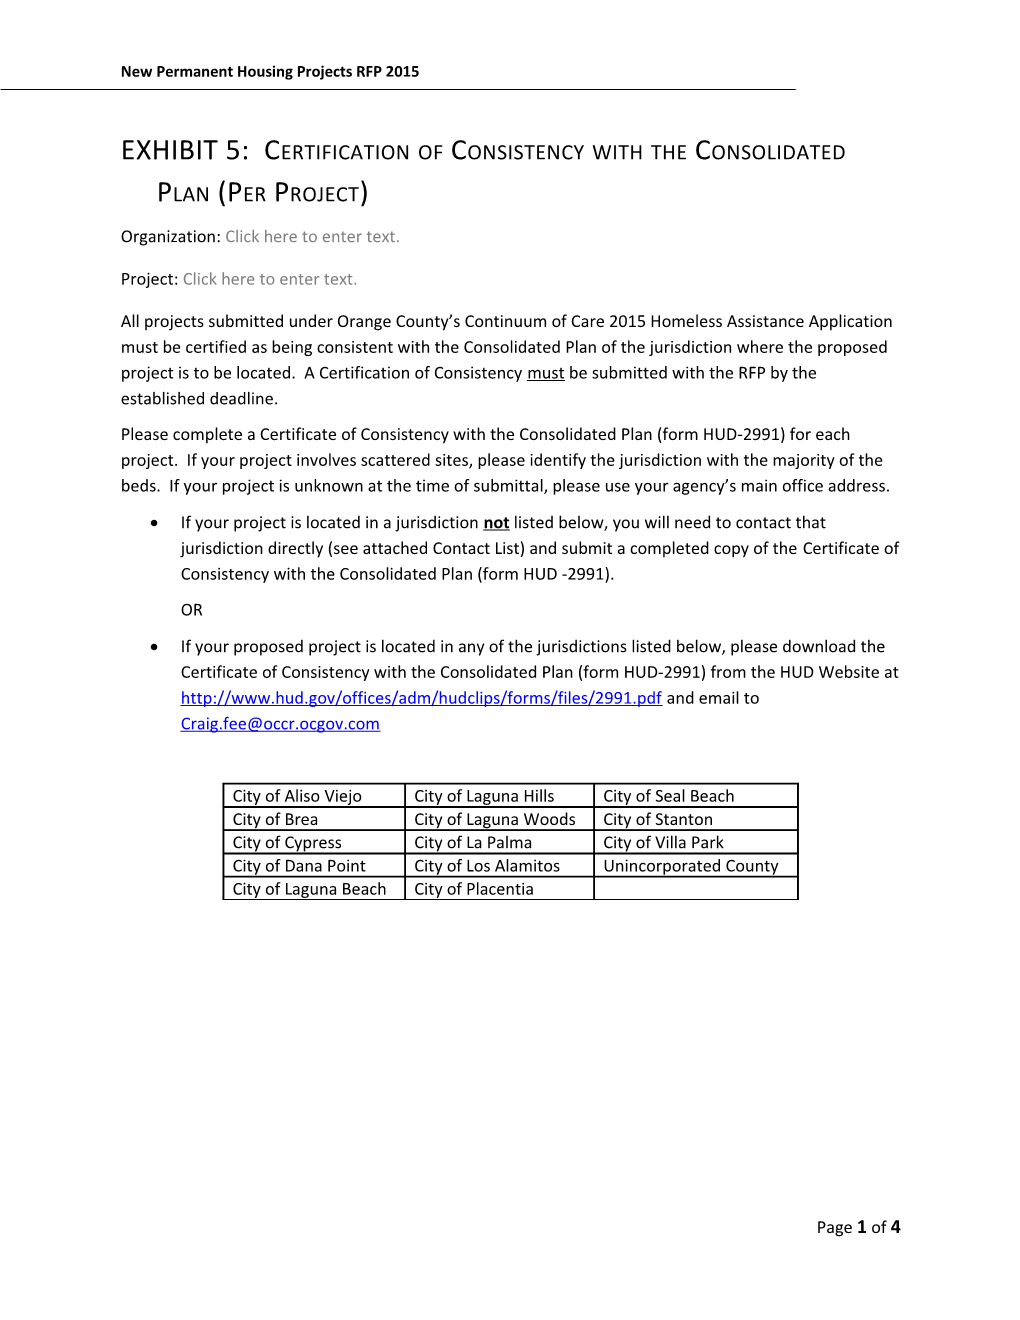 EXHIBIT5: Certification of Consistency with the Consolidated Plan (Per Project)